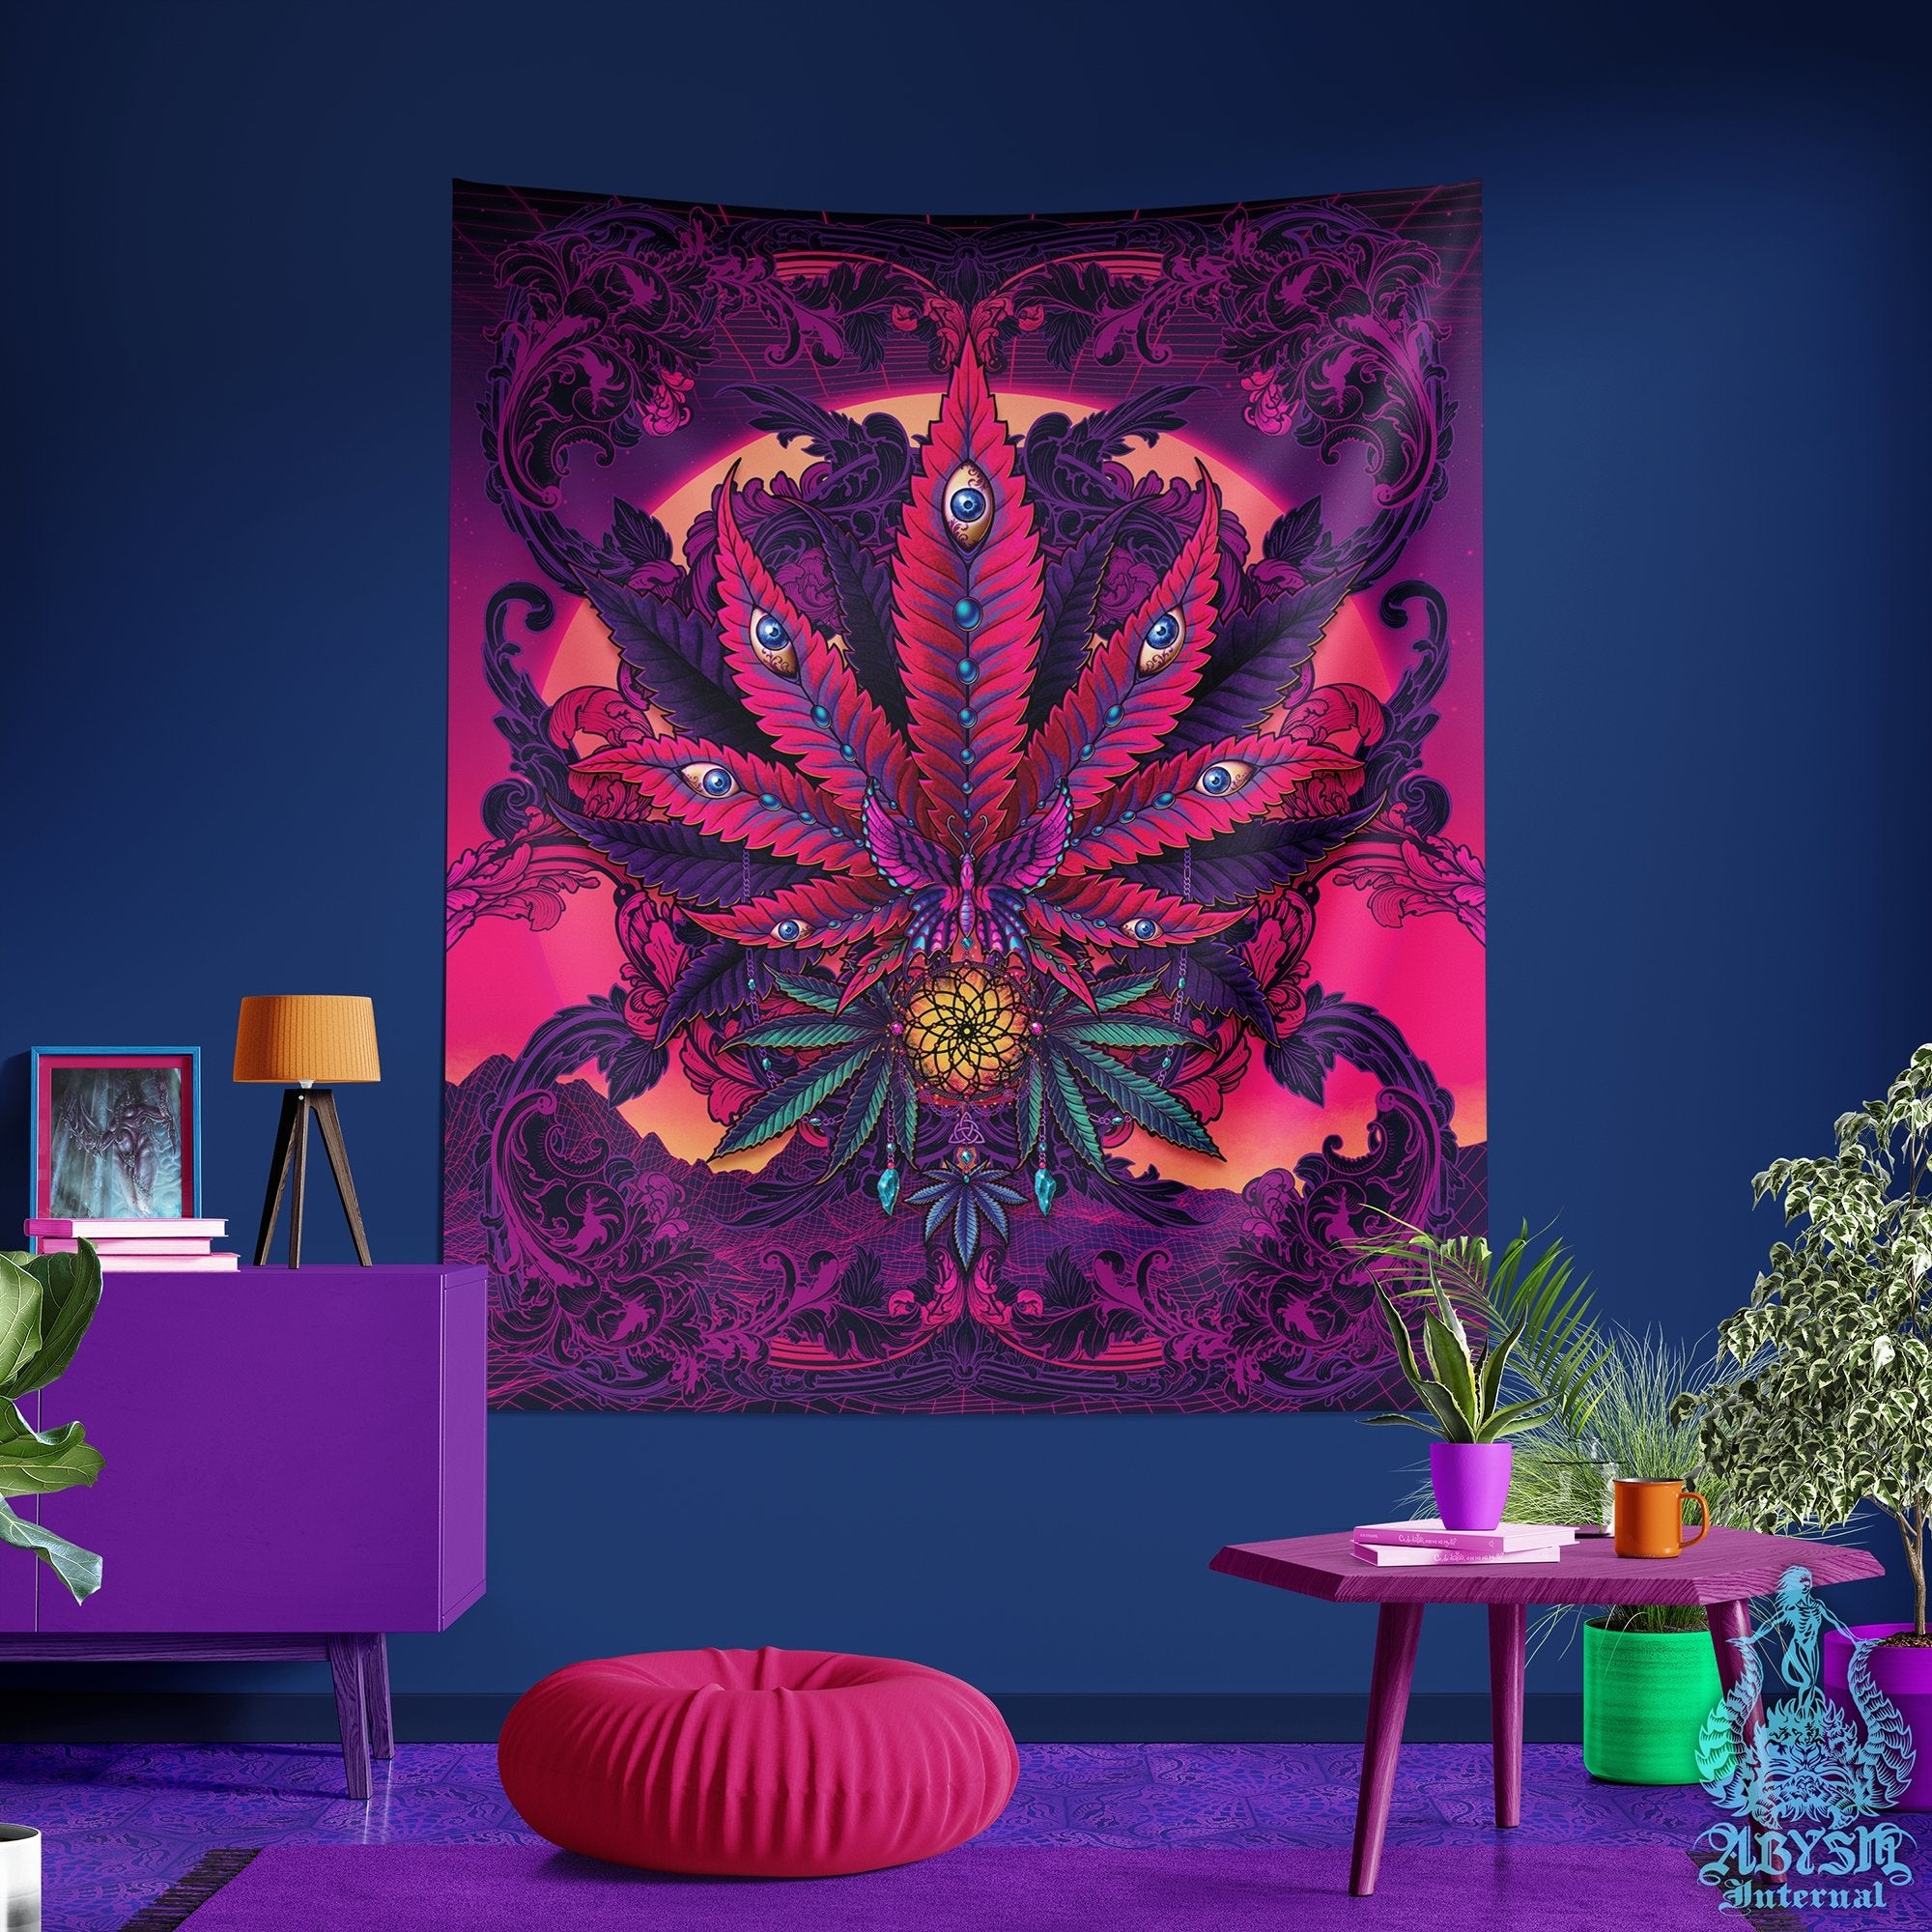 Psychedelic Weed Tapestry, Synthwave Cannabis Shop Decor, Marijuana Wall Hanging, Retrowave 80s Home Decor, Vaporwave Art Print, 420 Gift, Eclectic and Funky - Abysm Internal